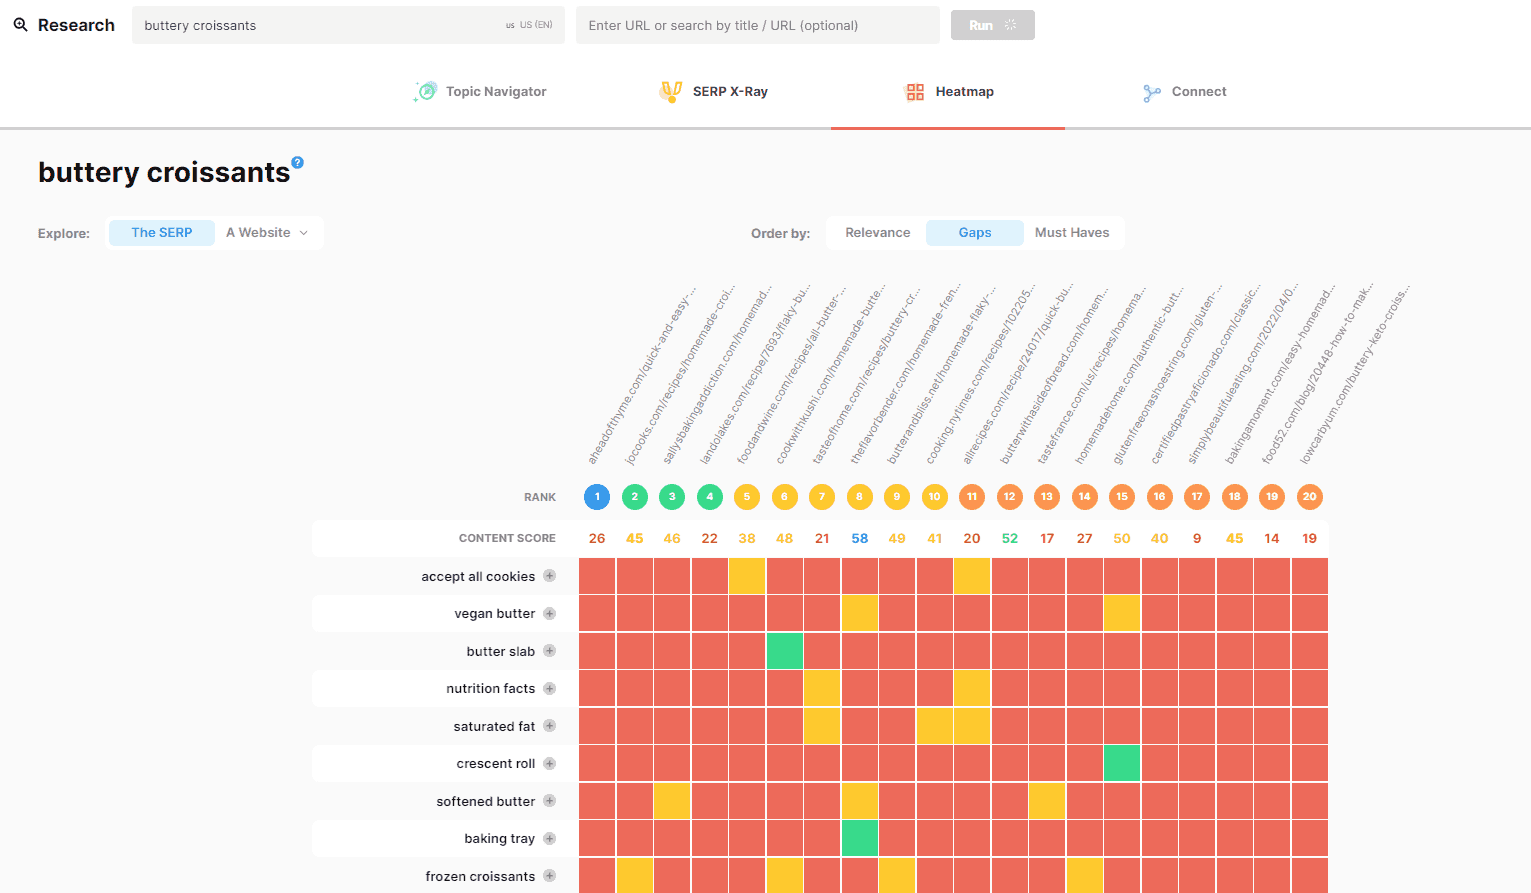 "Heatmap" report for "buttery croissants" in MarketMuse